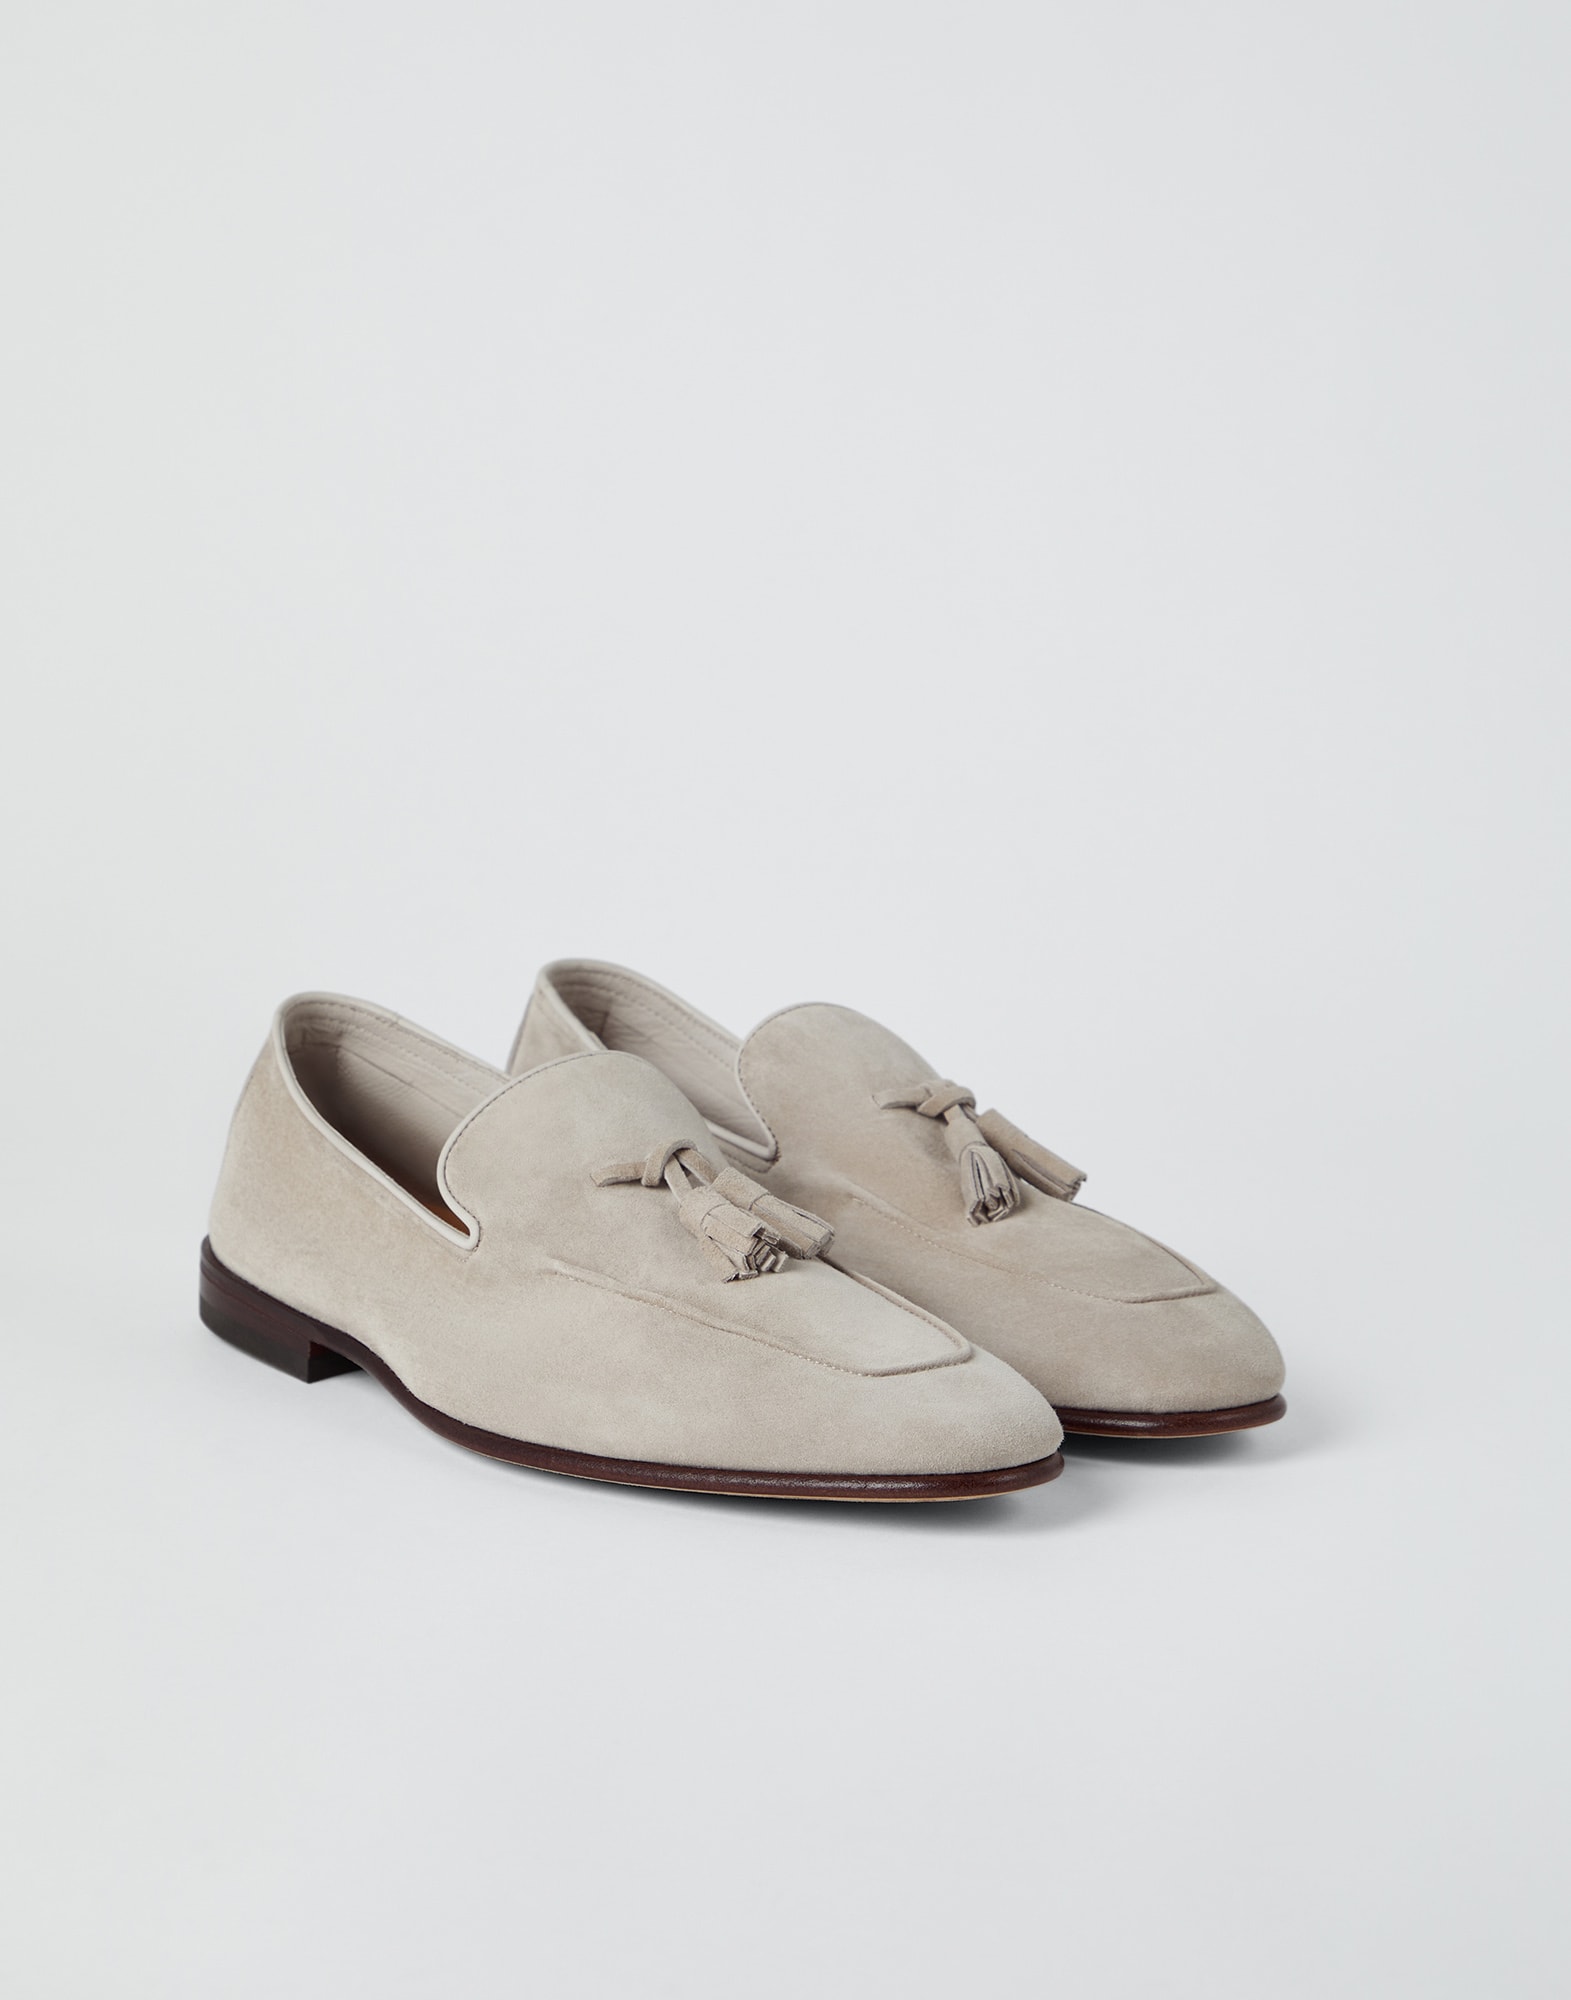 Unlined loafers